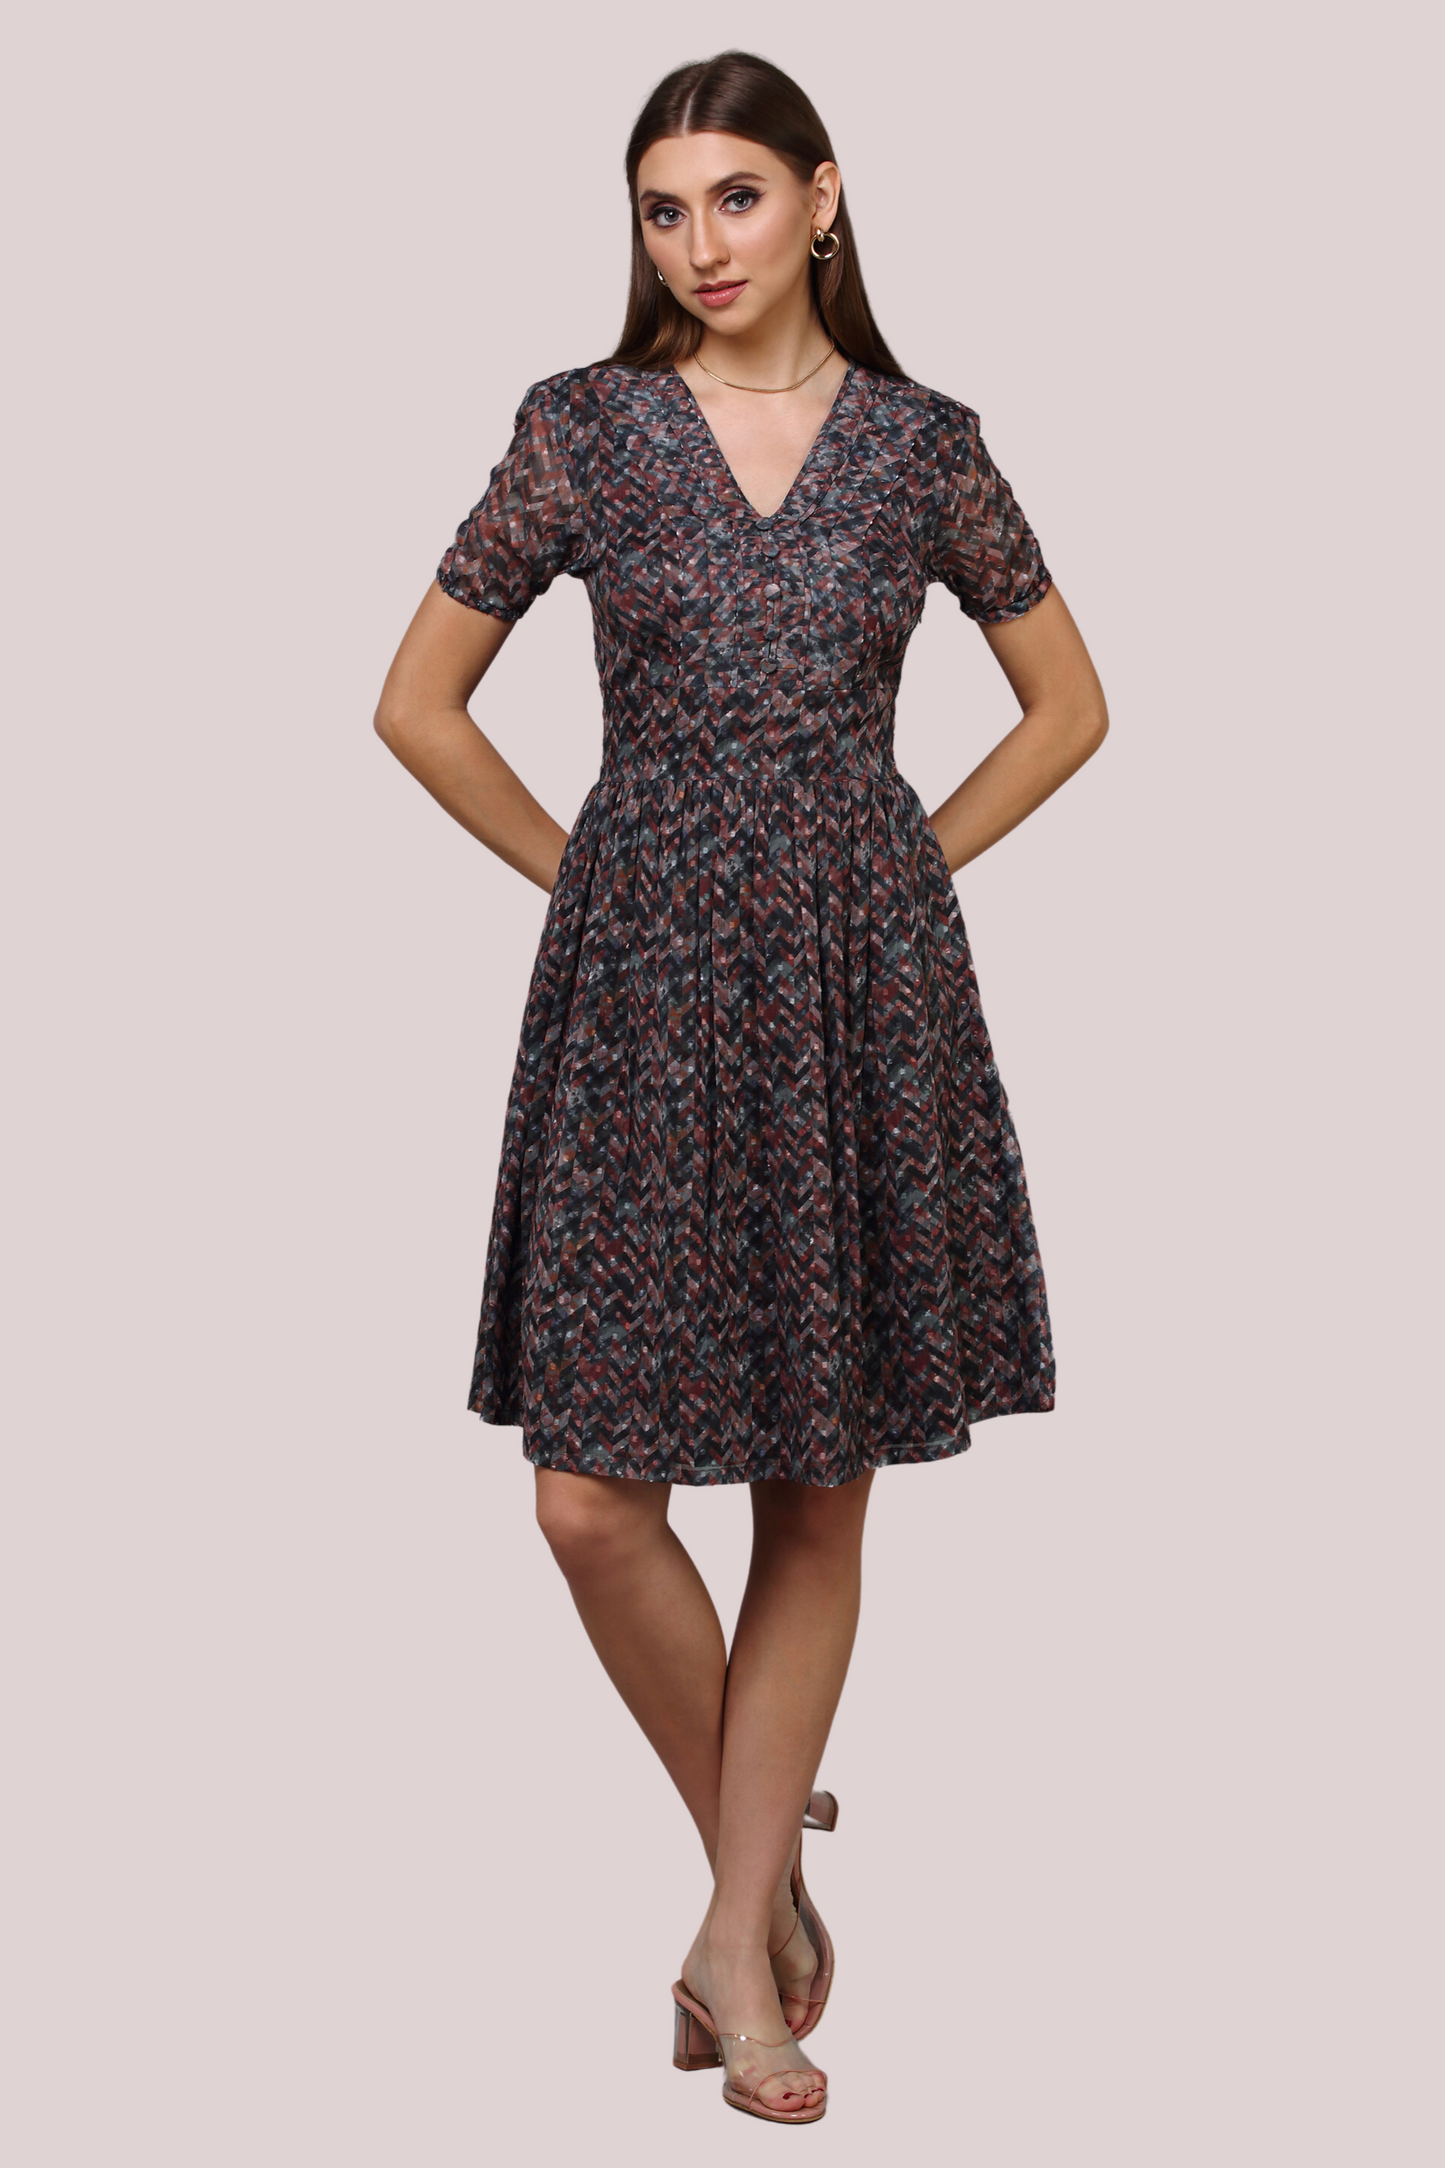 Printed Pleated dress with Buttons